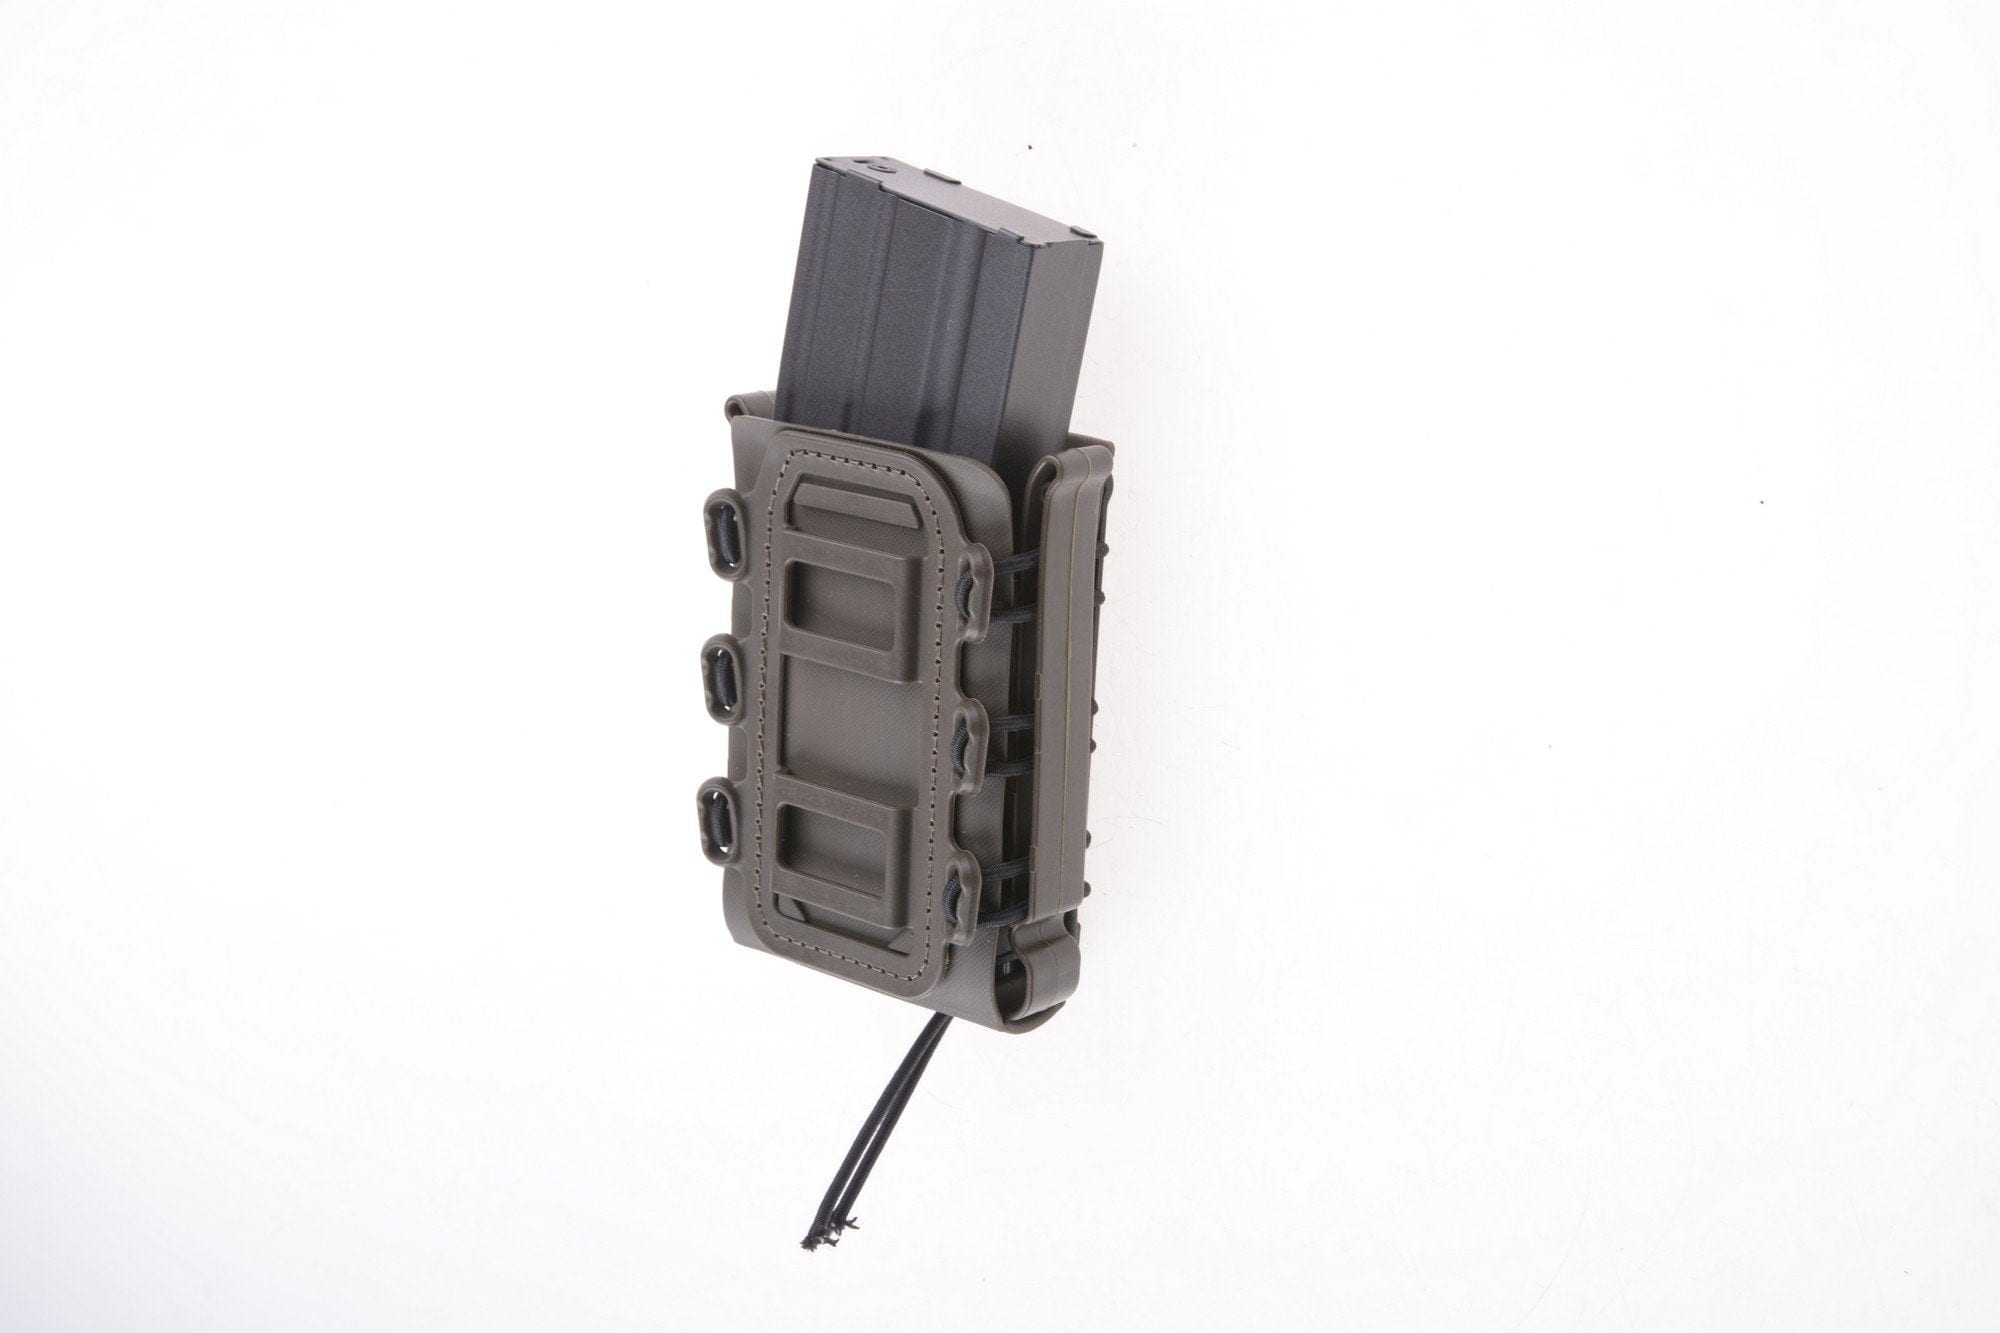 SSSMC Carabine Magazine Pouch - olive drab by FMA on Airsoft Mania Europe